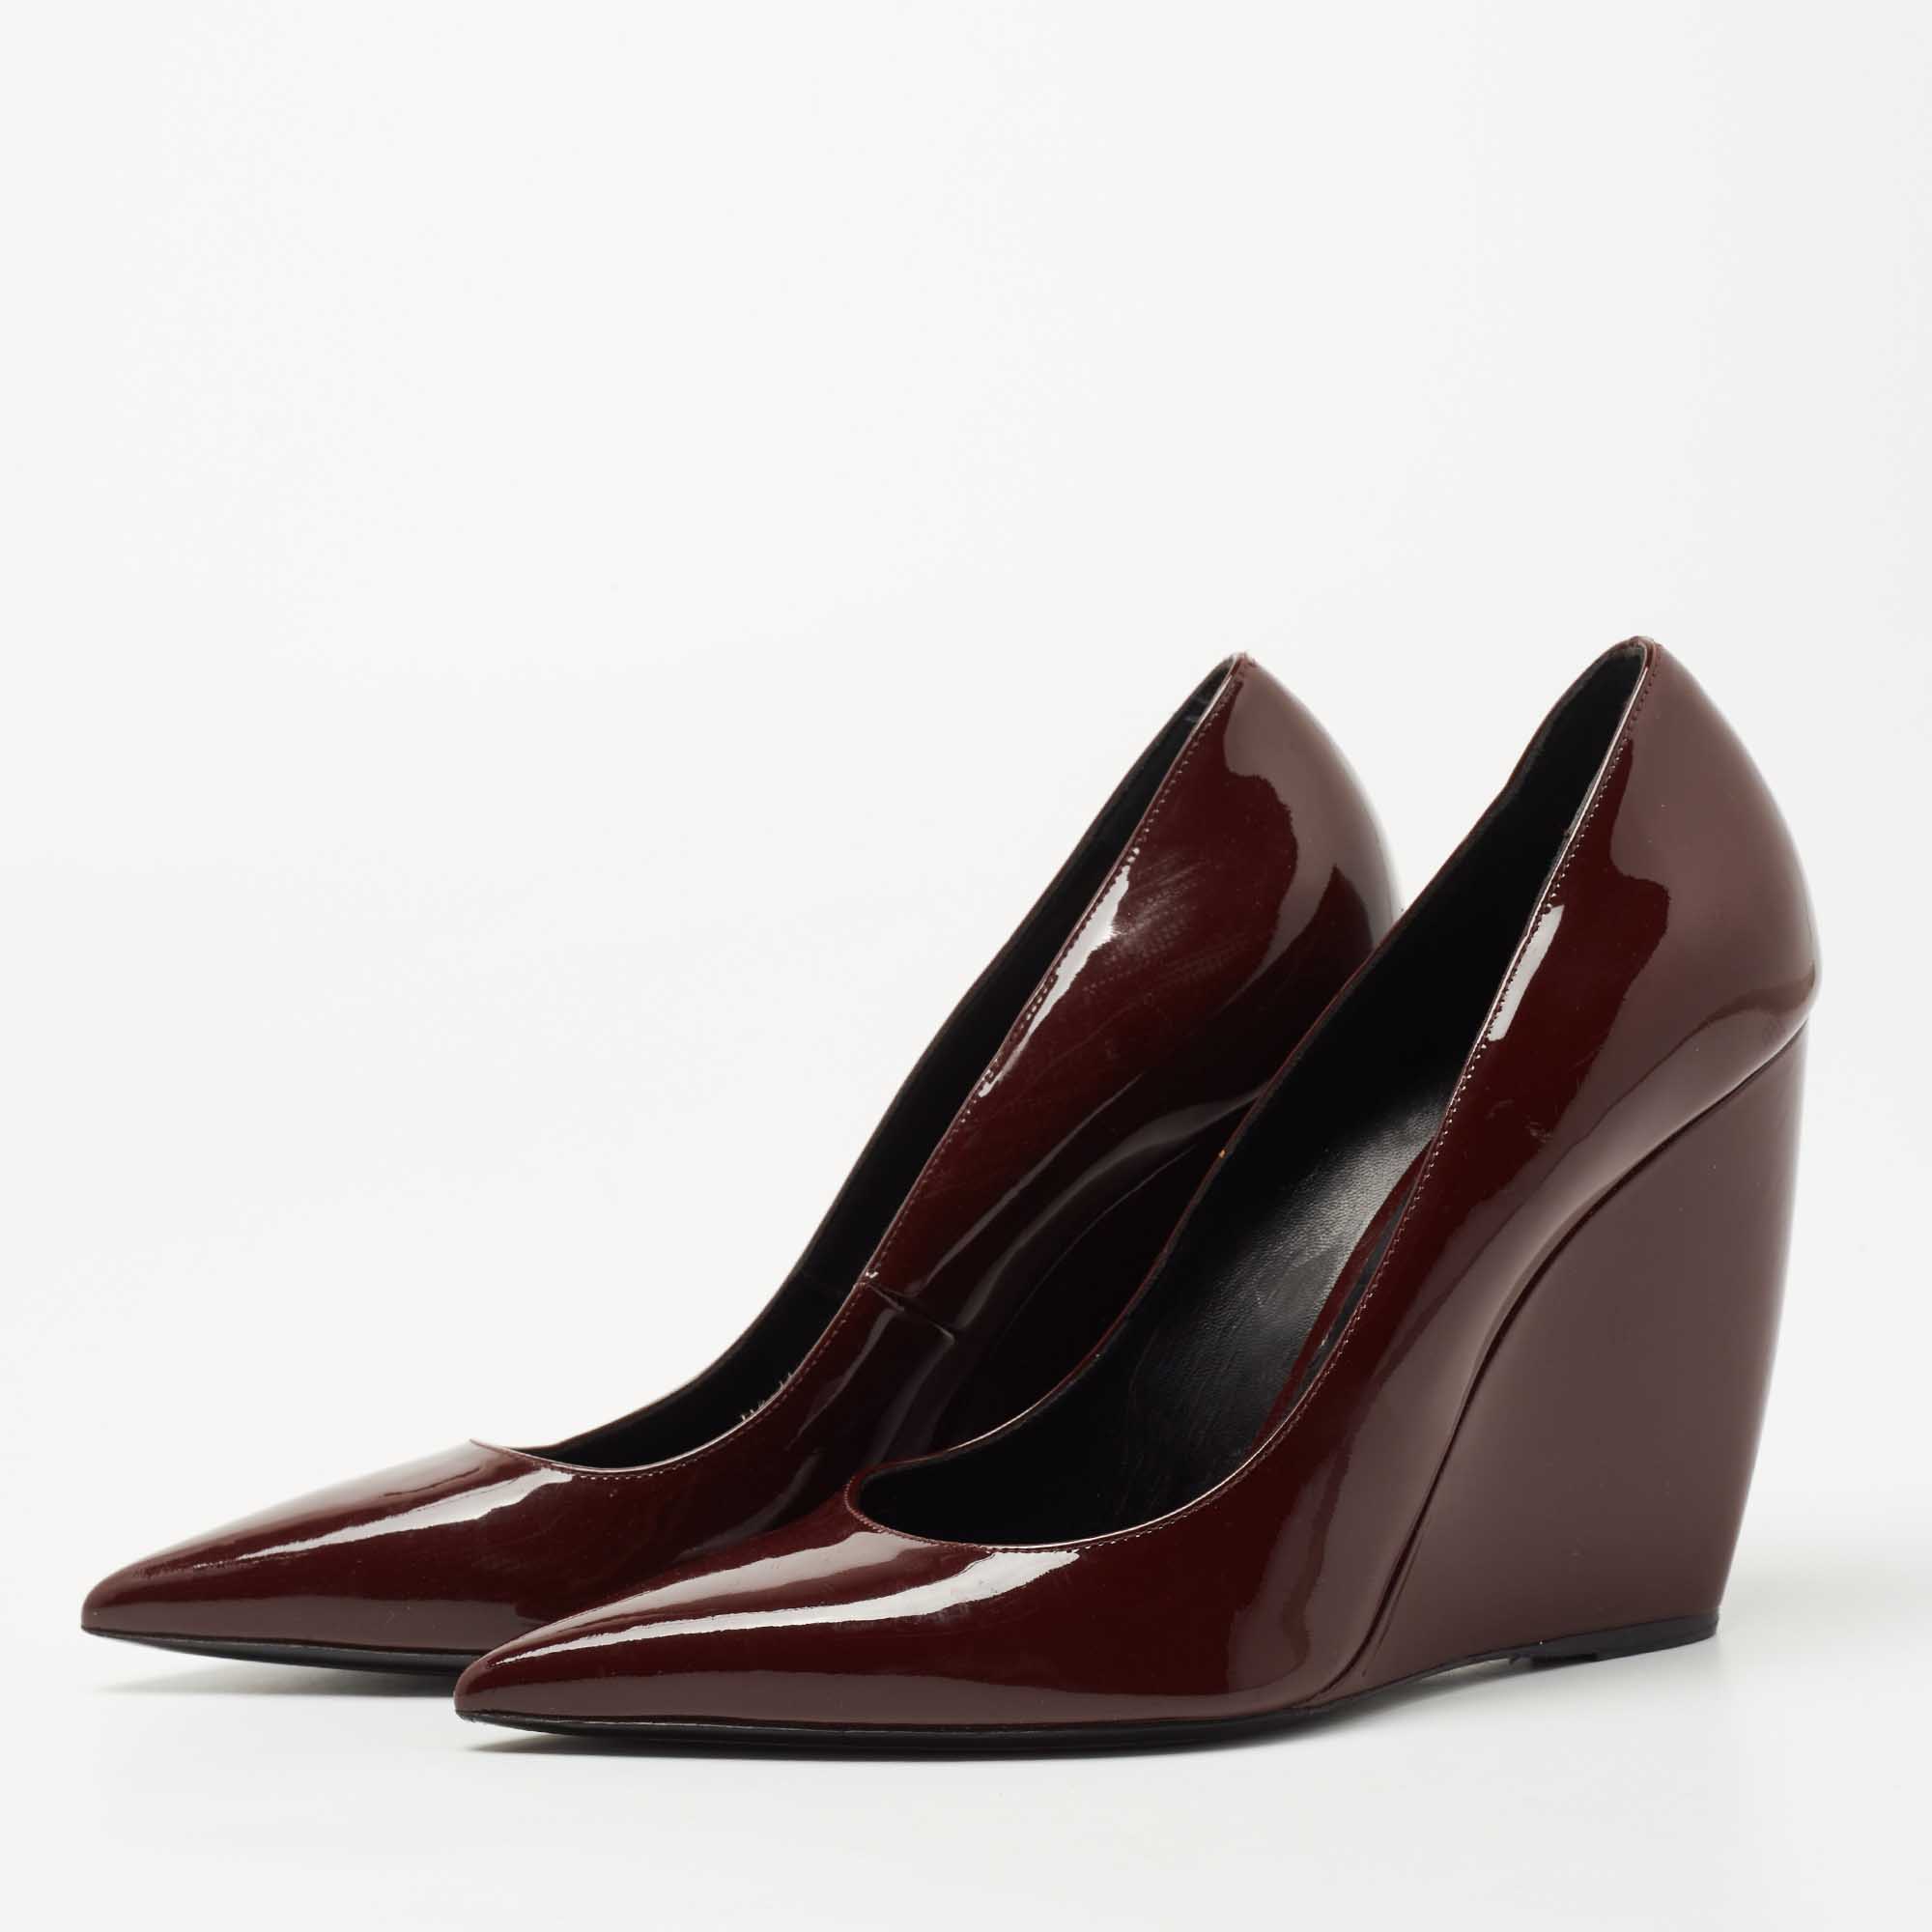 

Nicholas Kirkwood Burgundy Patent Leather Pointed Toe Wedge Pumps Size